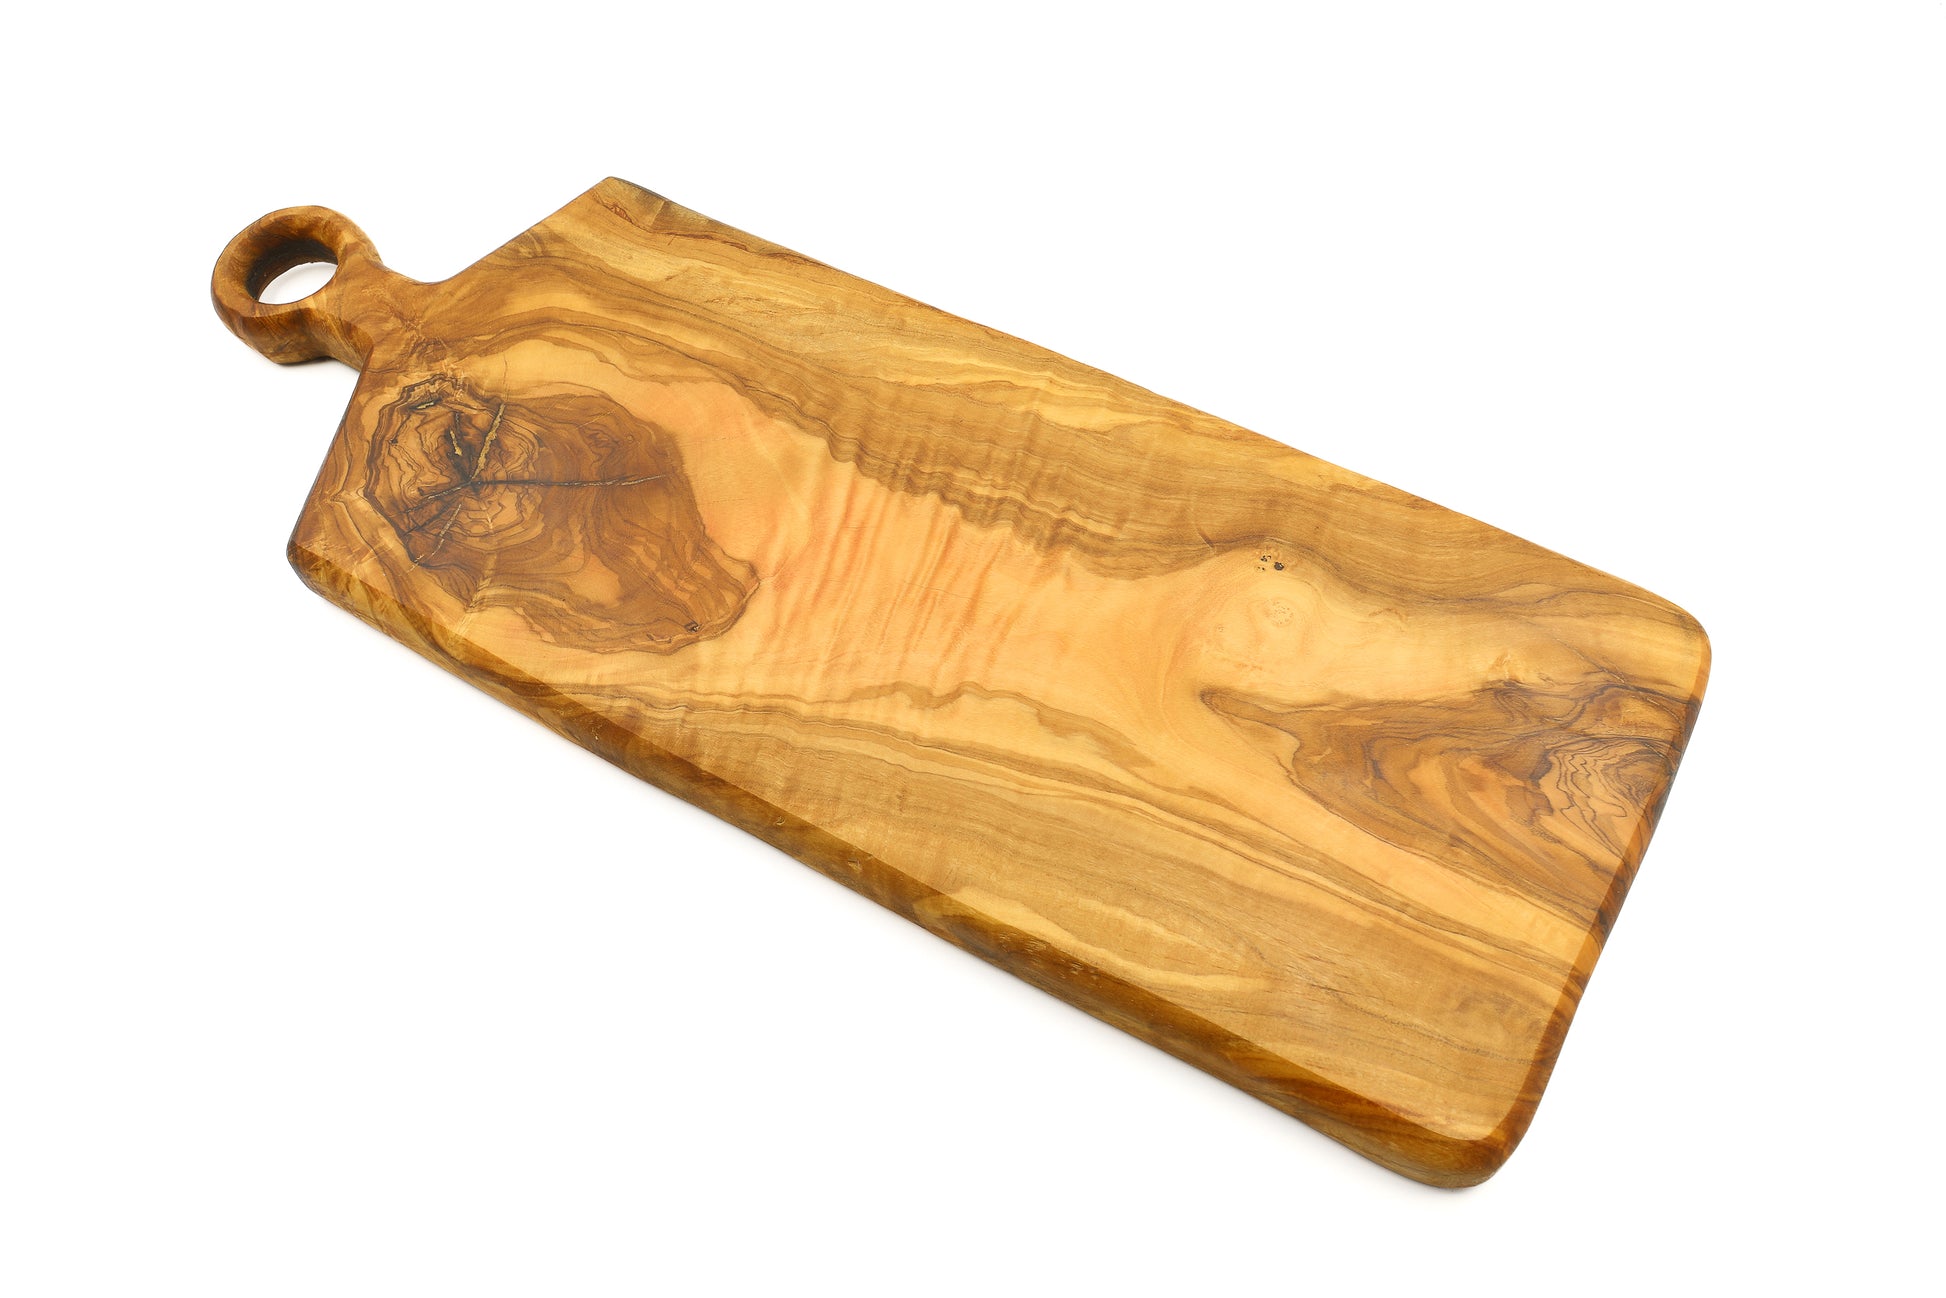 Olive wood cutting board with a stylish ringed handle, rectangular